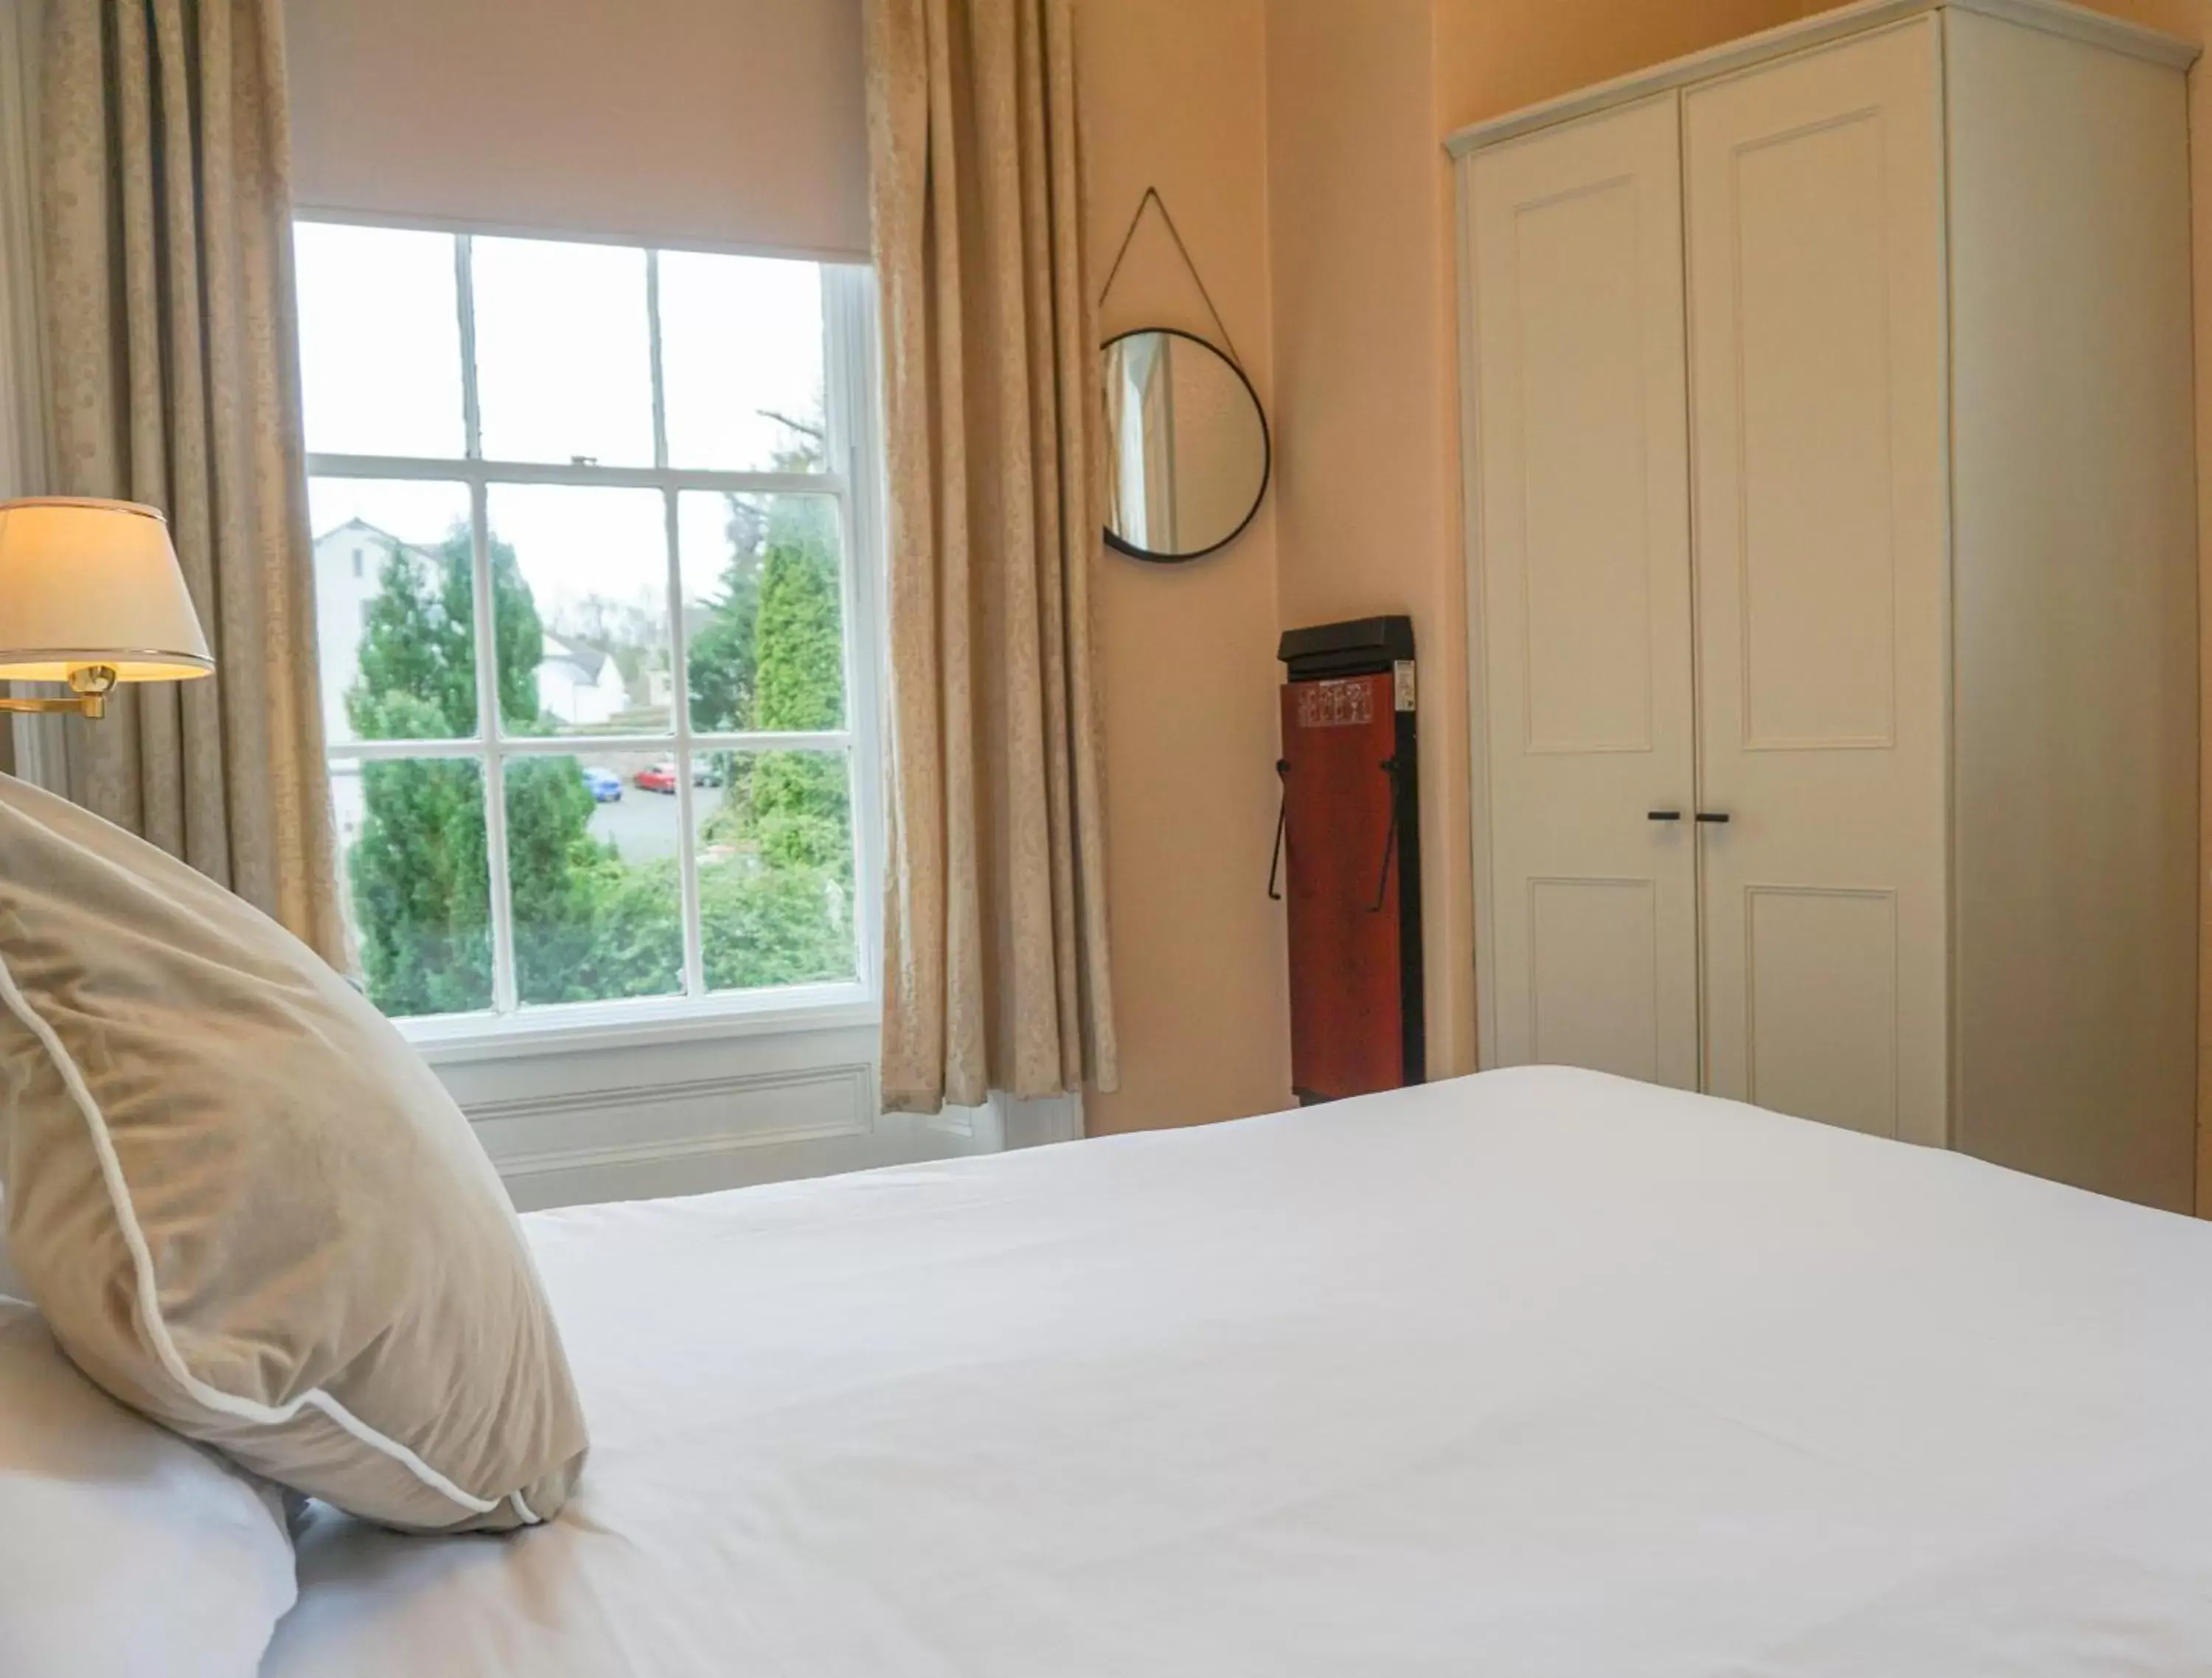 Bed in Manor House Hotel, Cockermouth